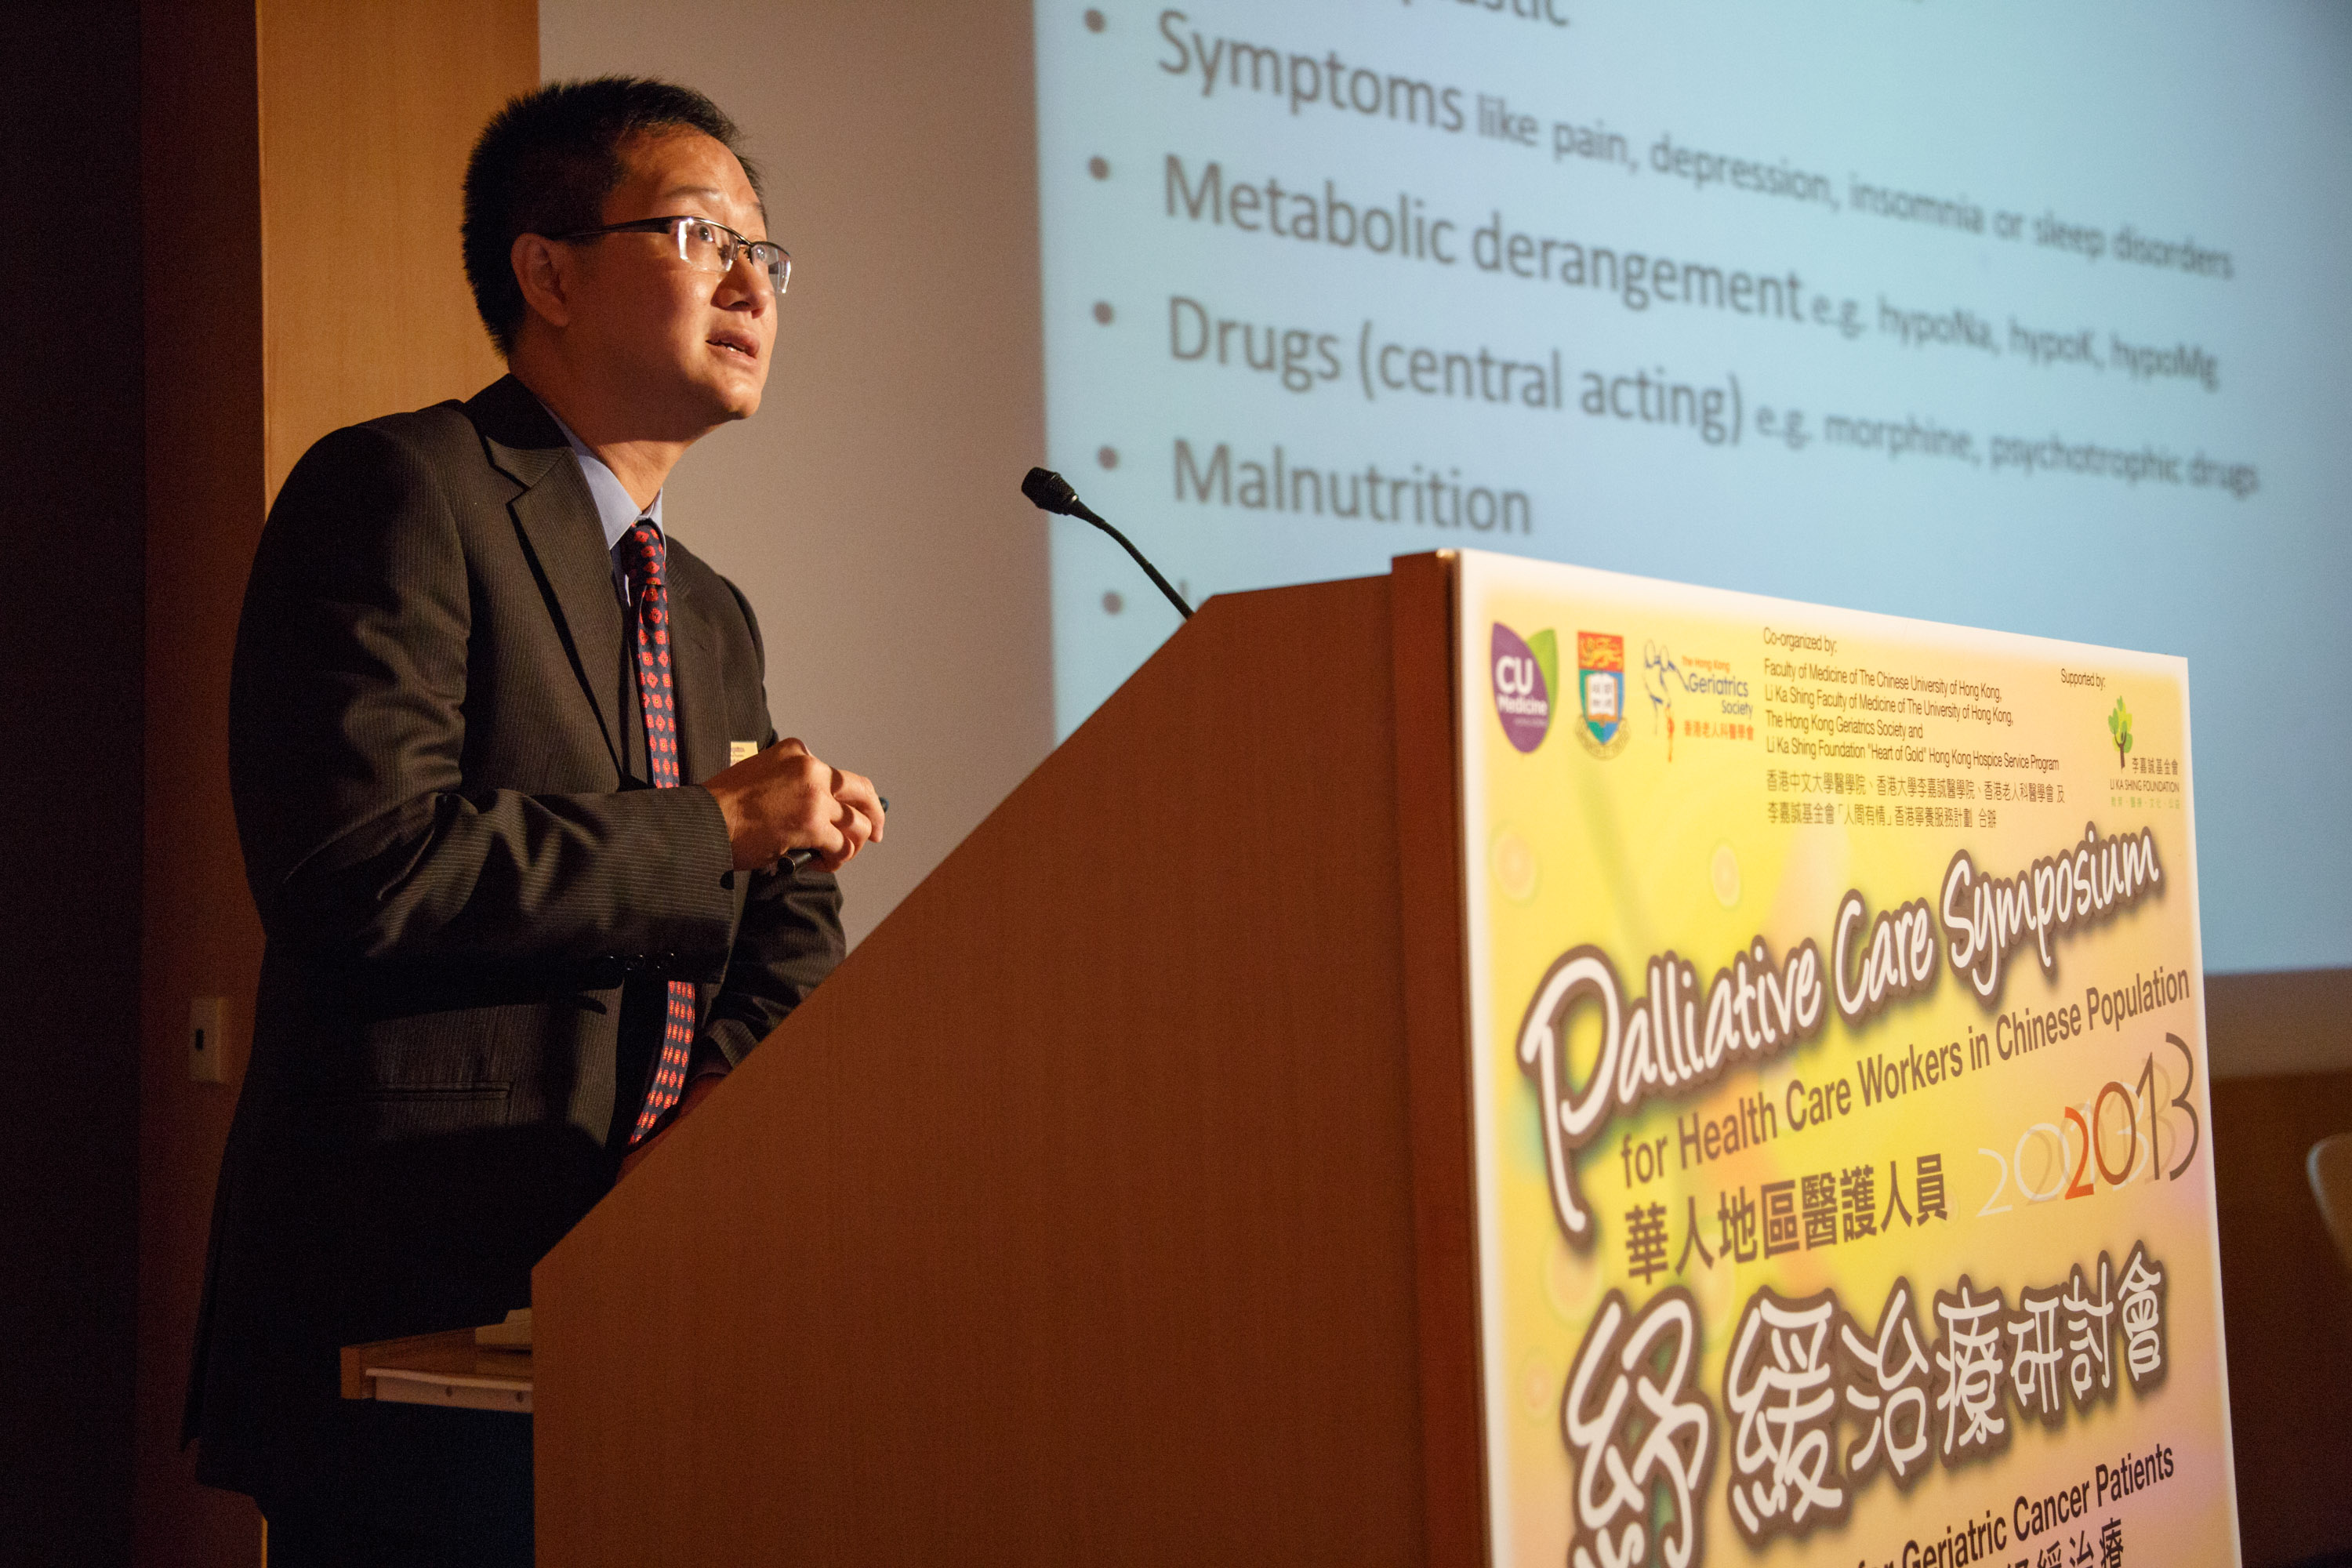 Dr. Lam Po Tin from the Hong Kong Geriatrics Society delivered a plenary lecture on ‘Symptom Management in the Elderly Cancer Patient’